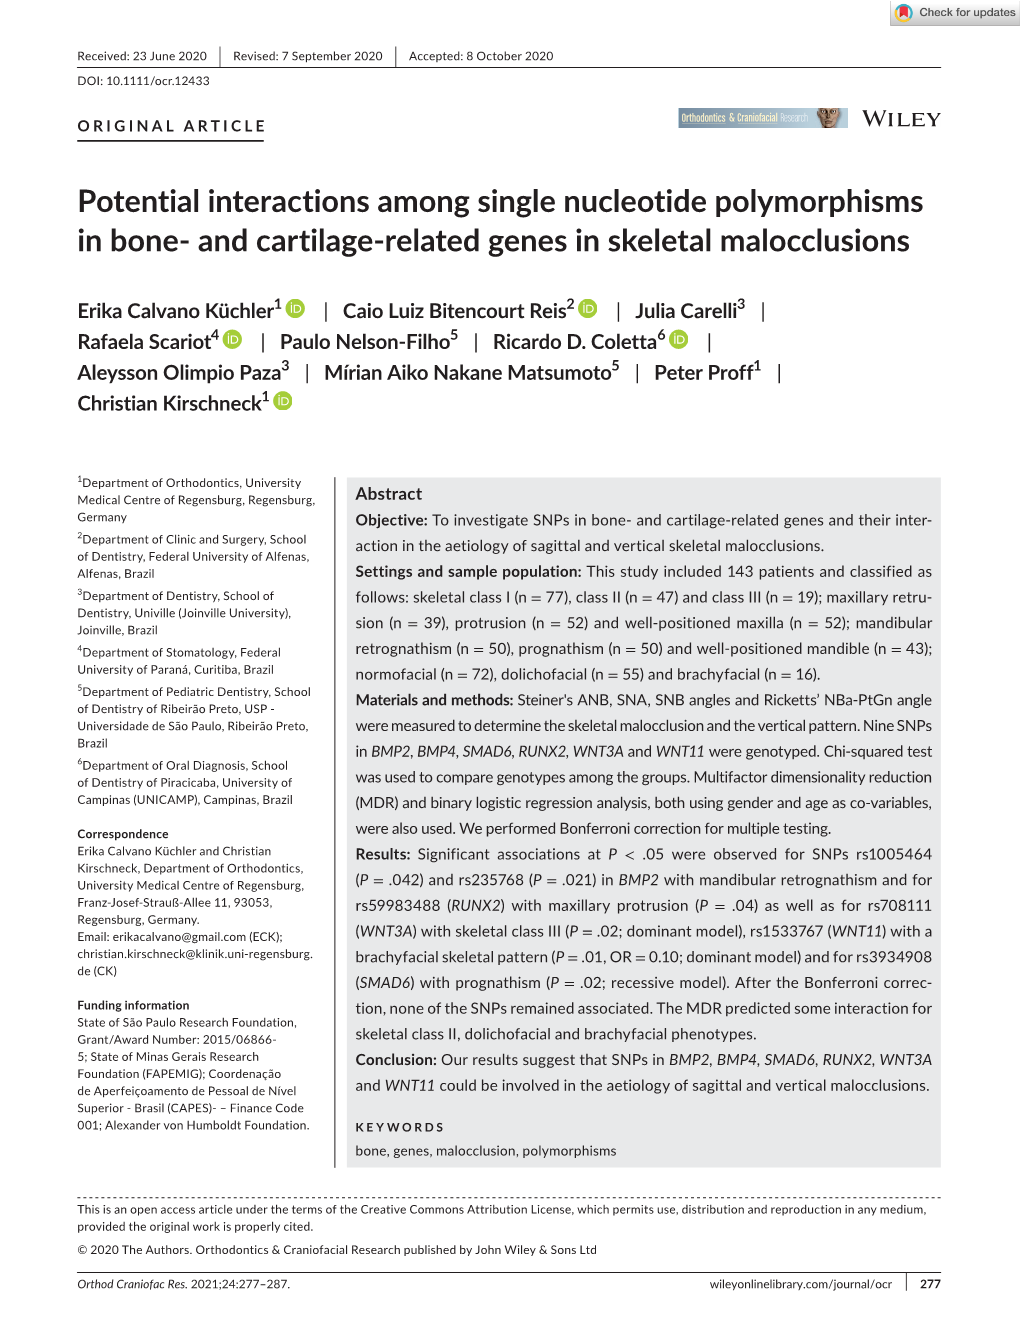 Potential Interactions Among Single Nucleotide Polymorphisms in Bone- and Cartilage-Related Genes in Skeletal Malocclusions